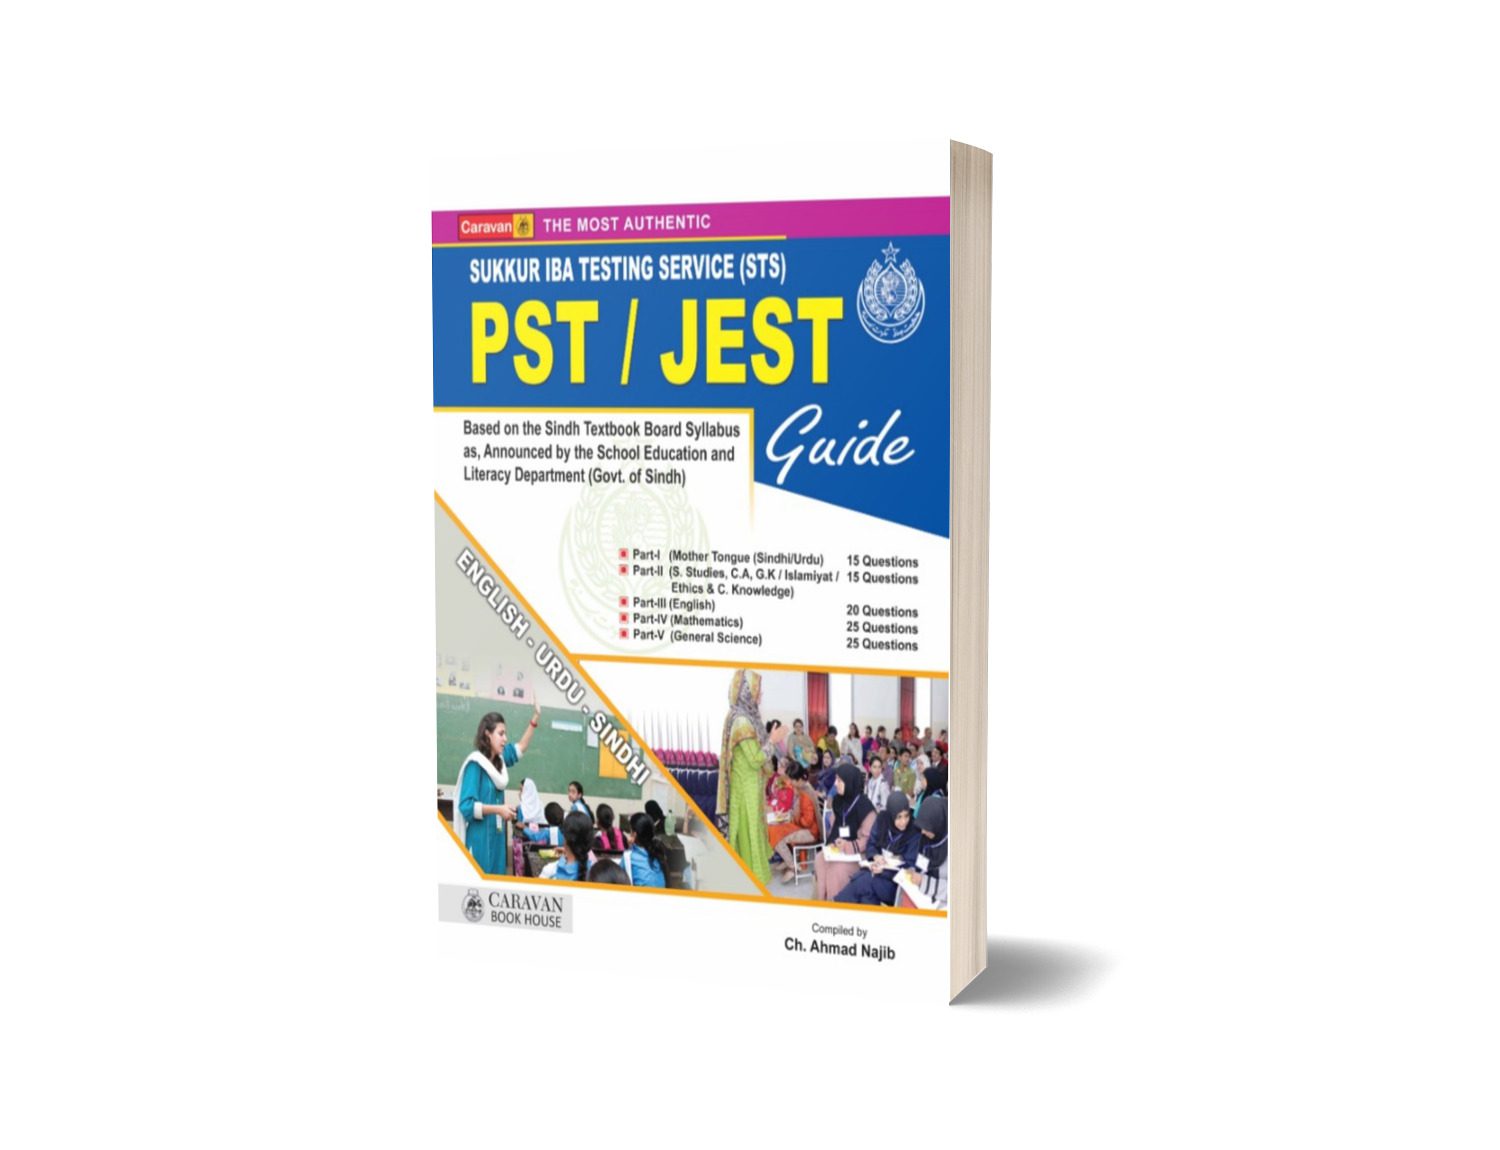 PST JEST Guide for IBA Testing Service By Caravan Book House